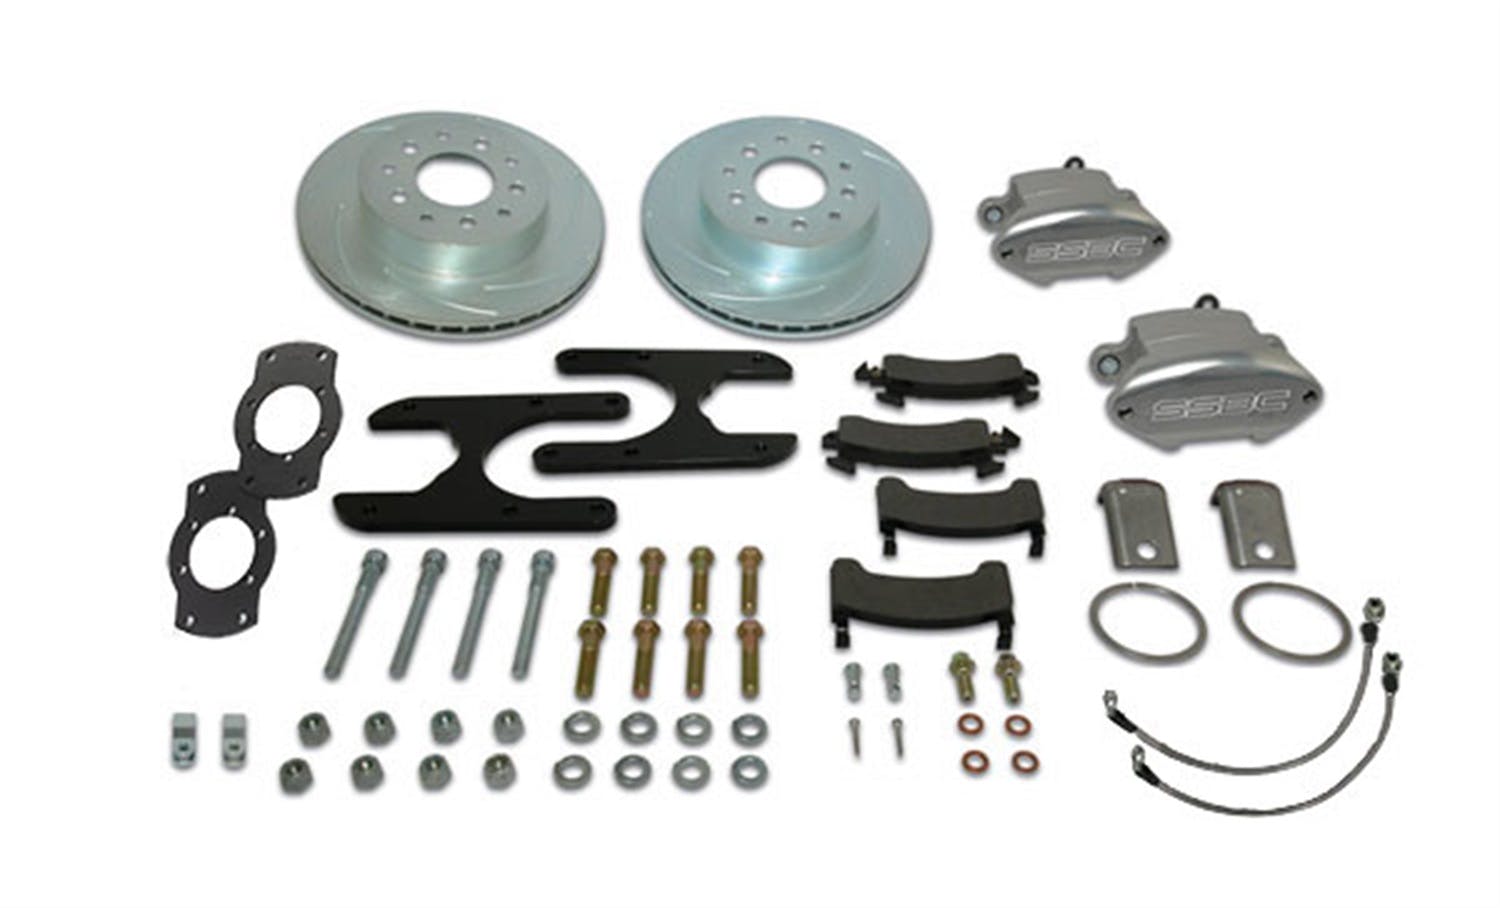 Stainless Steel Brakes A111-21R Kit A111-21 w/red calipers